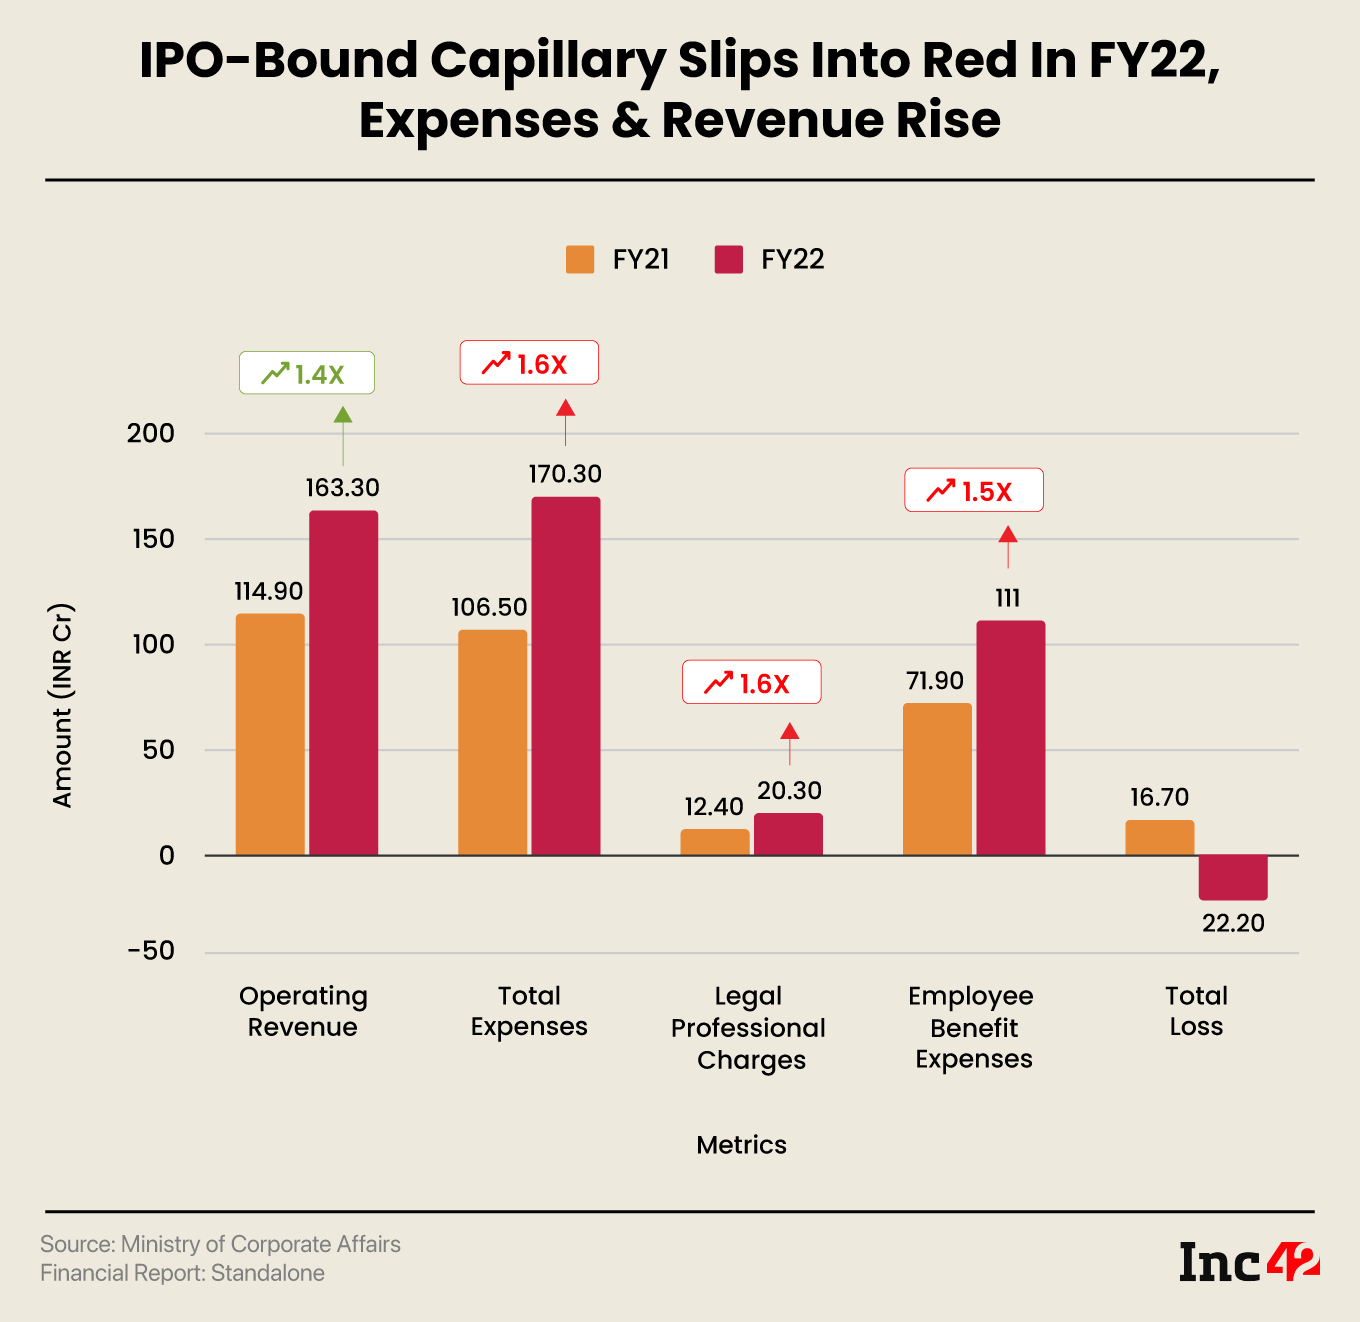 IPO-Bound Capillary Slips Into Red In FY22, Expenses & Revenue Rise